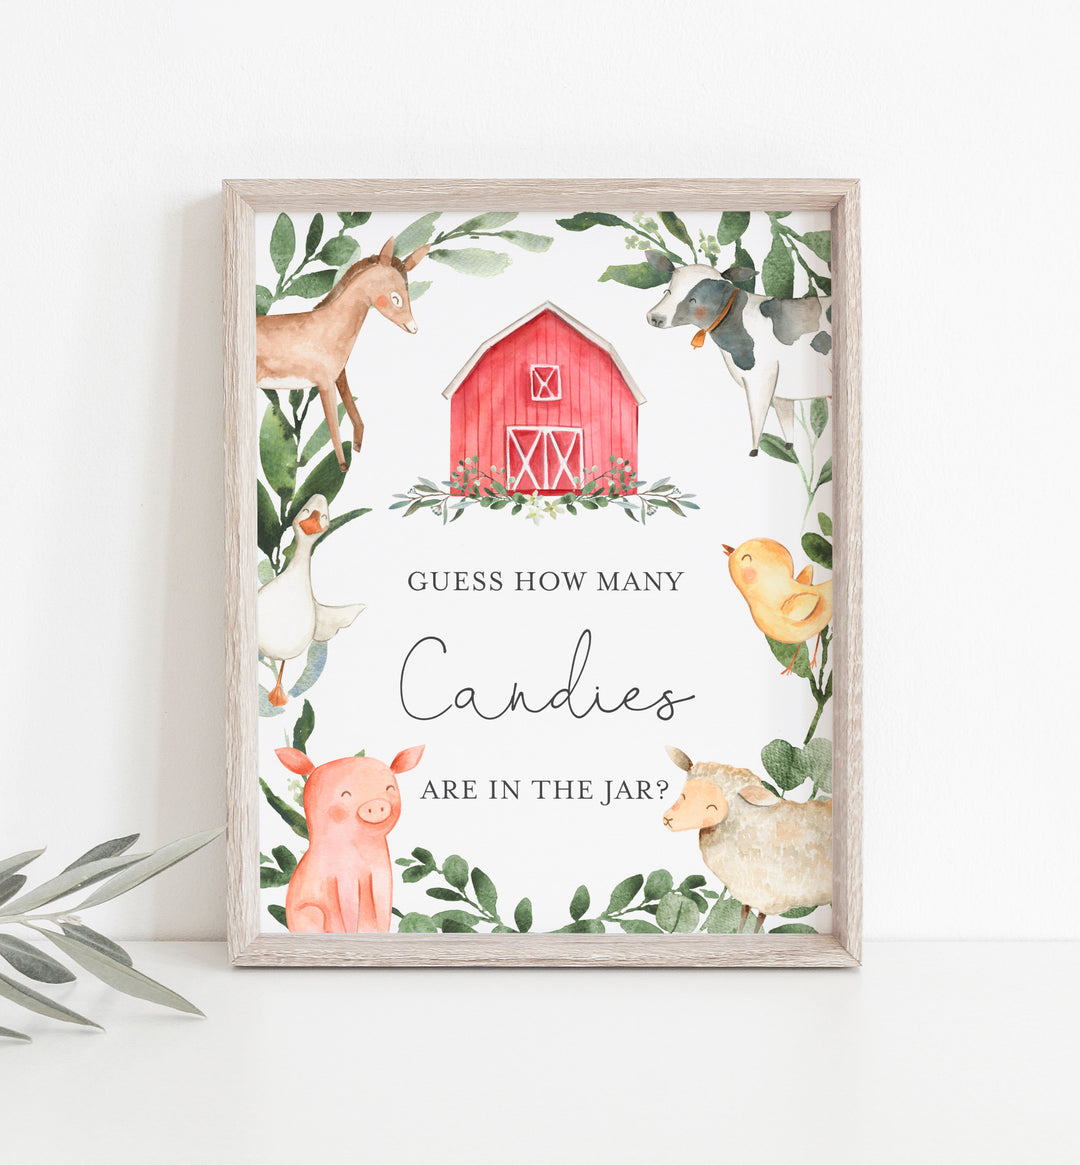 On The Farm Baby Shower Guess How Many Candies Game Printable